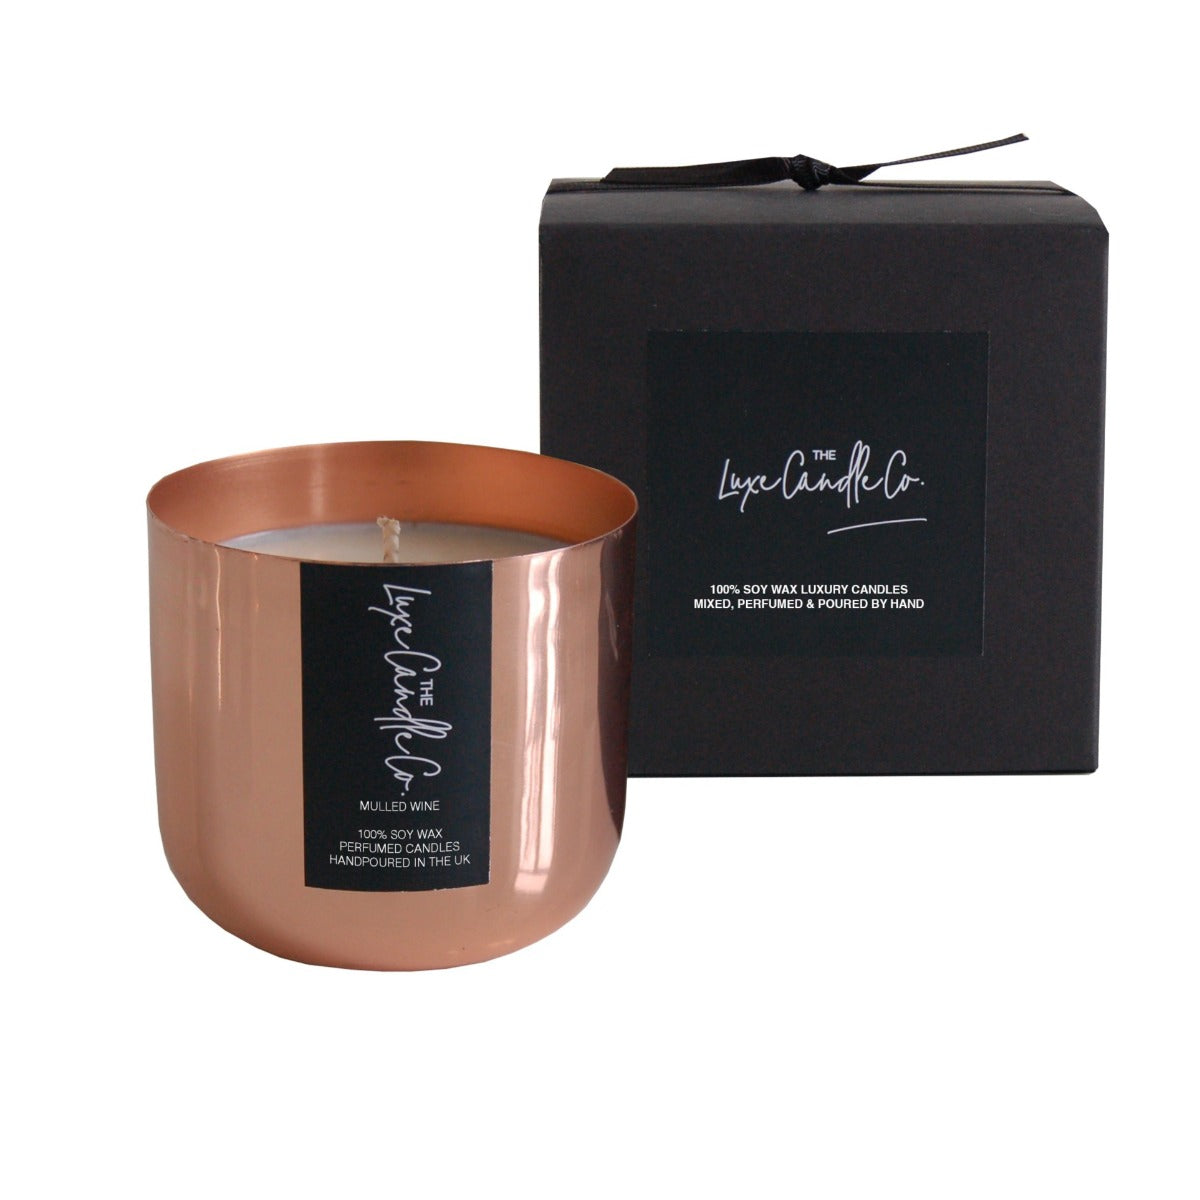 Scented Copper Mulled wine soy wax candle